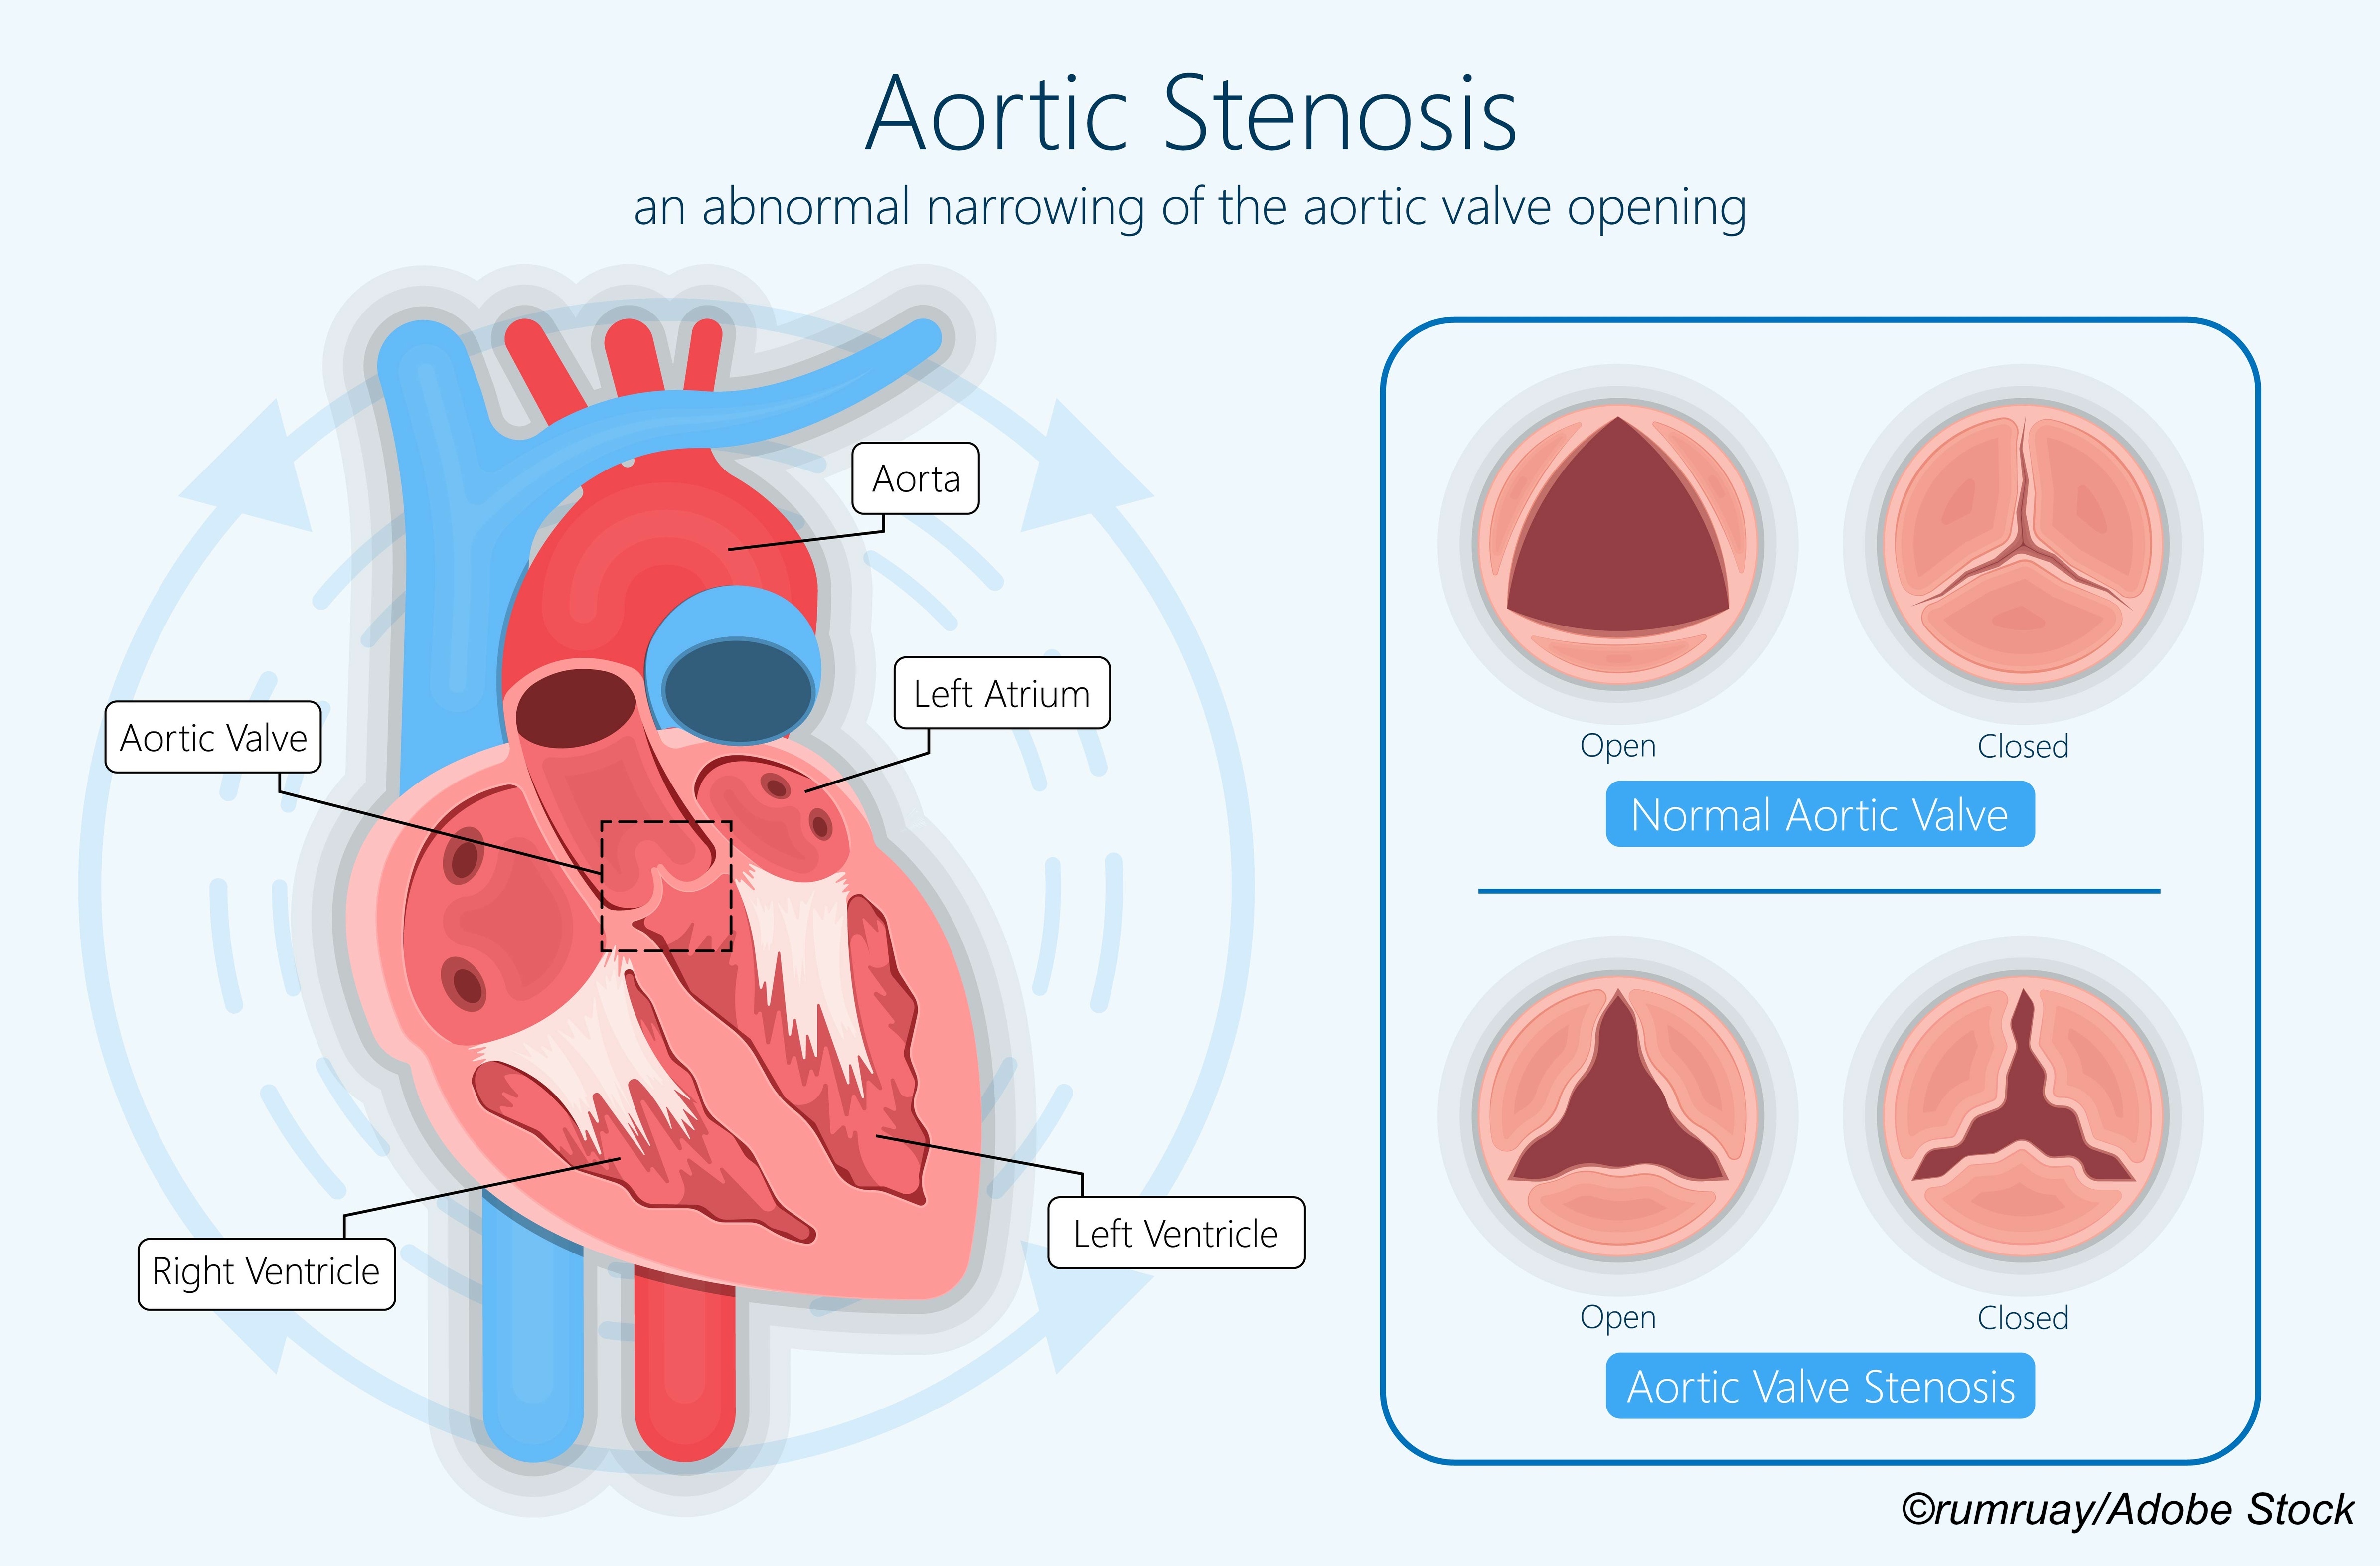 Survey Offers Snapshot of Contemporary Management of Aortic Stenosis